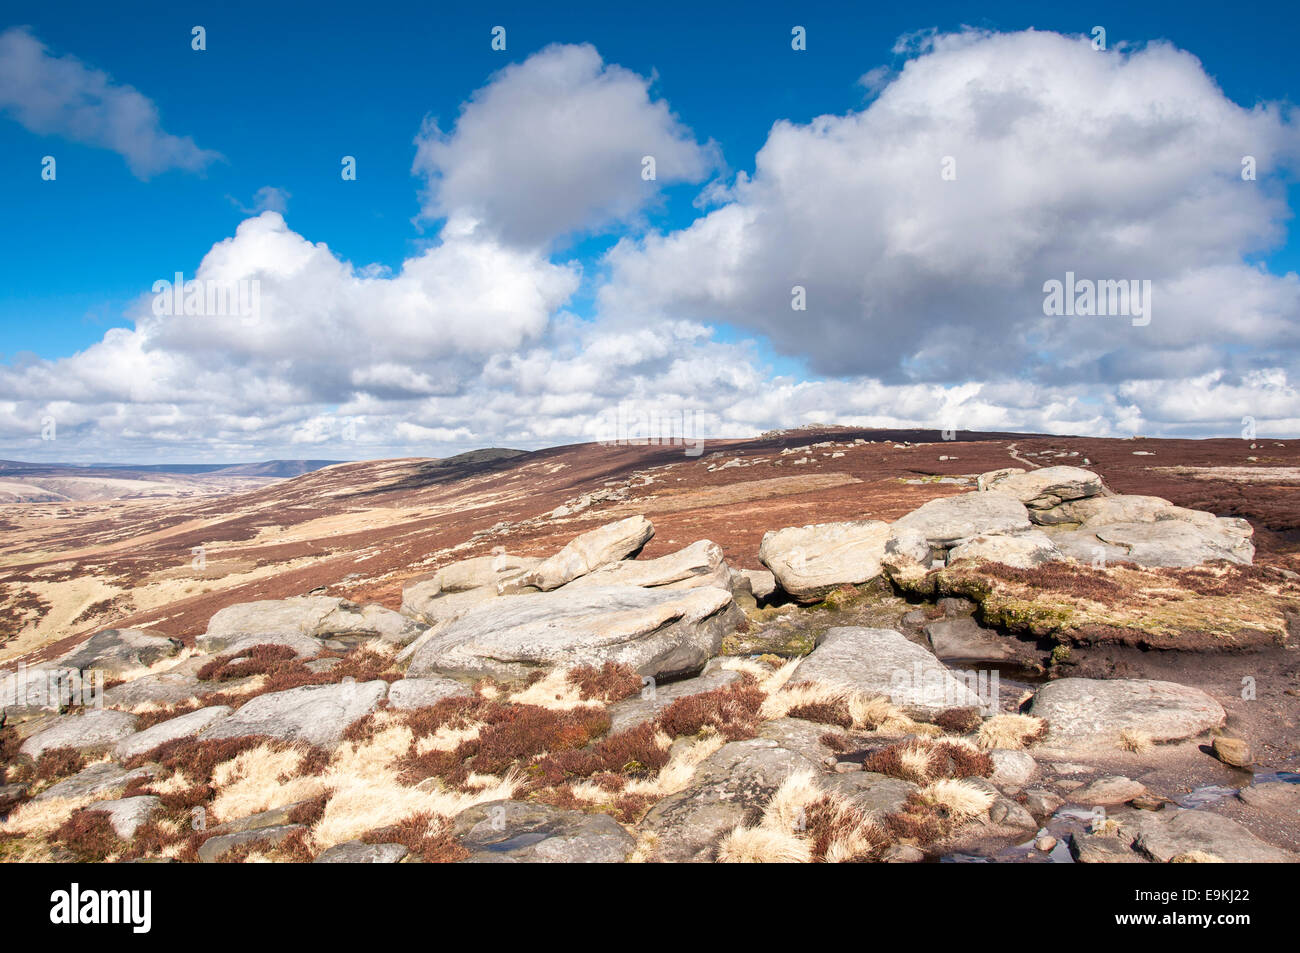 Derwent edge in bright winter sunshine. A colourful landscape of gritstone rocks and heather beneath a blue sky. Stock Photo